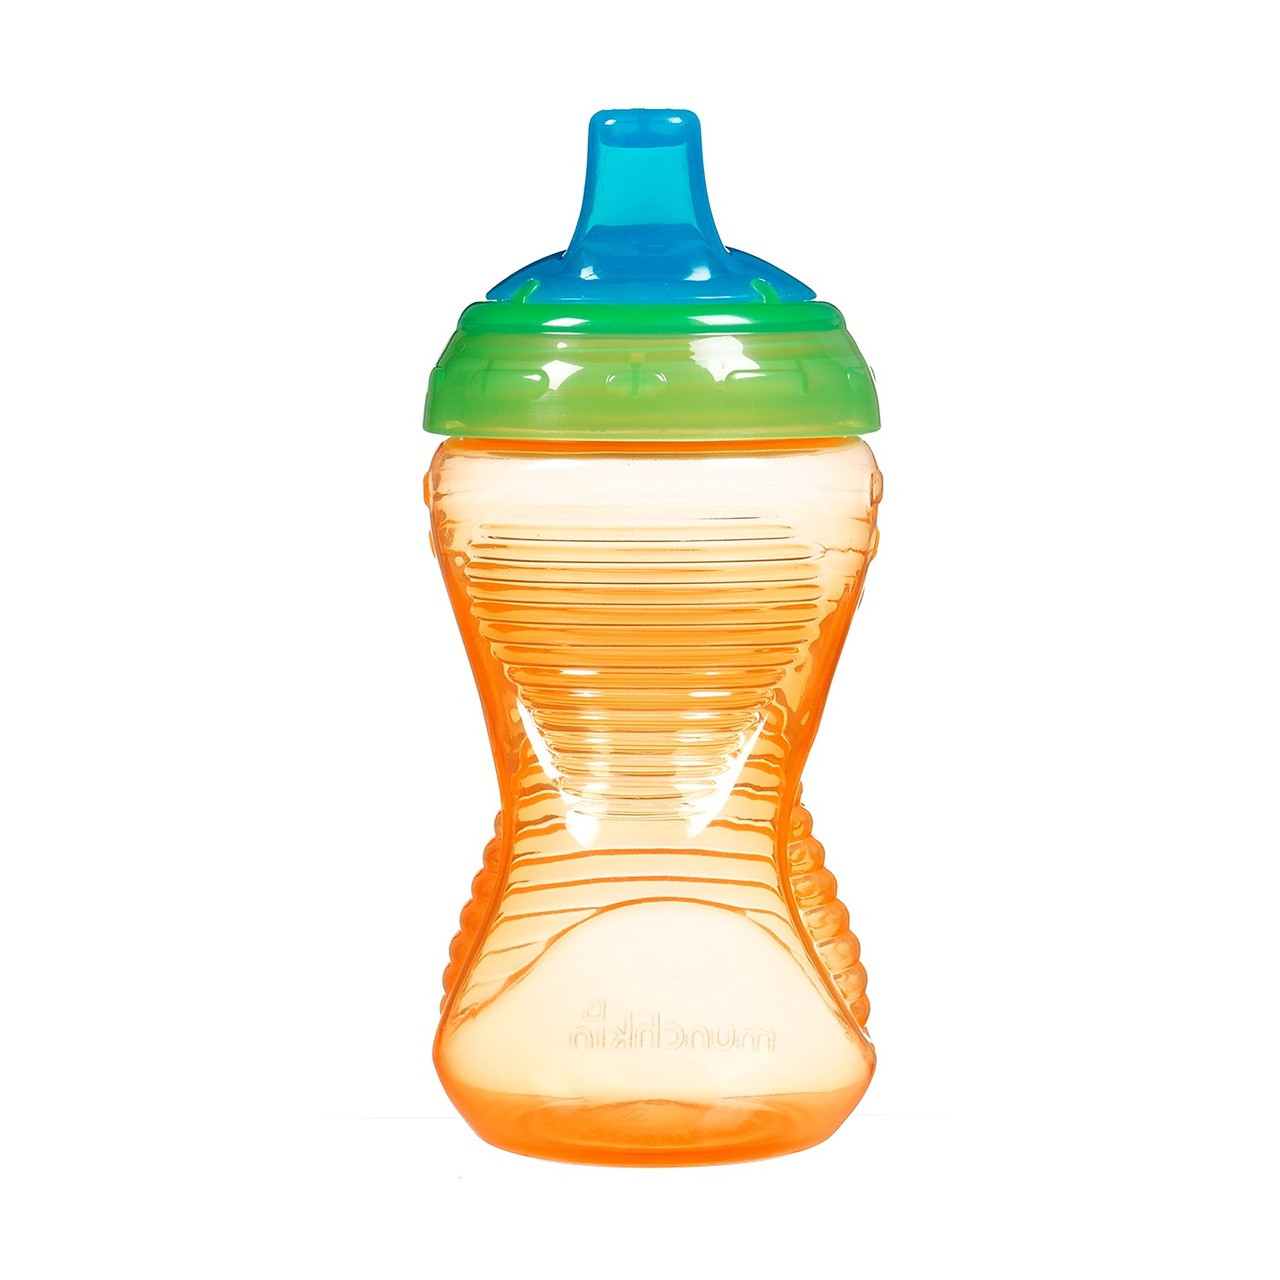 Buy Leak Proof Sippy Cup For Toddler online